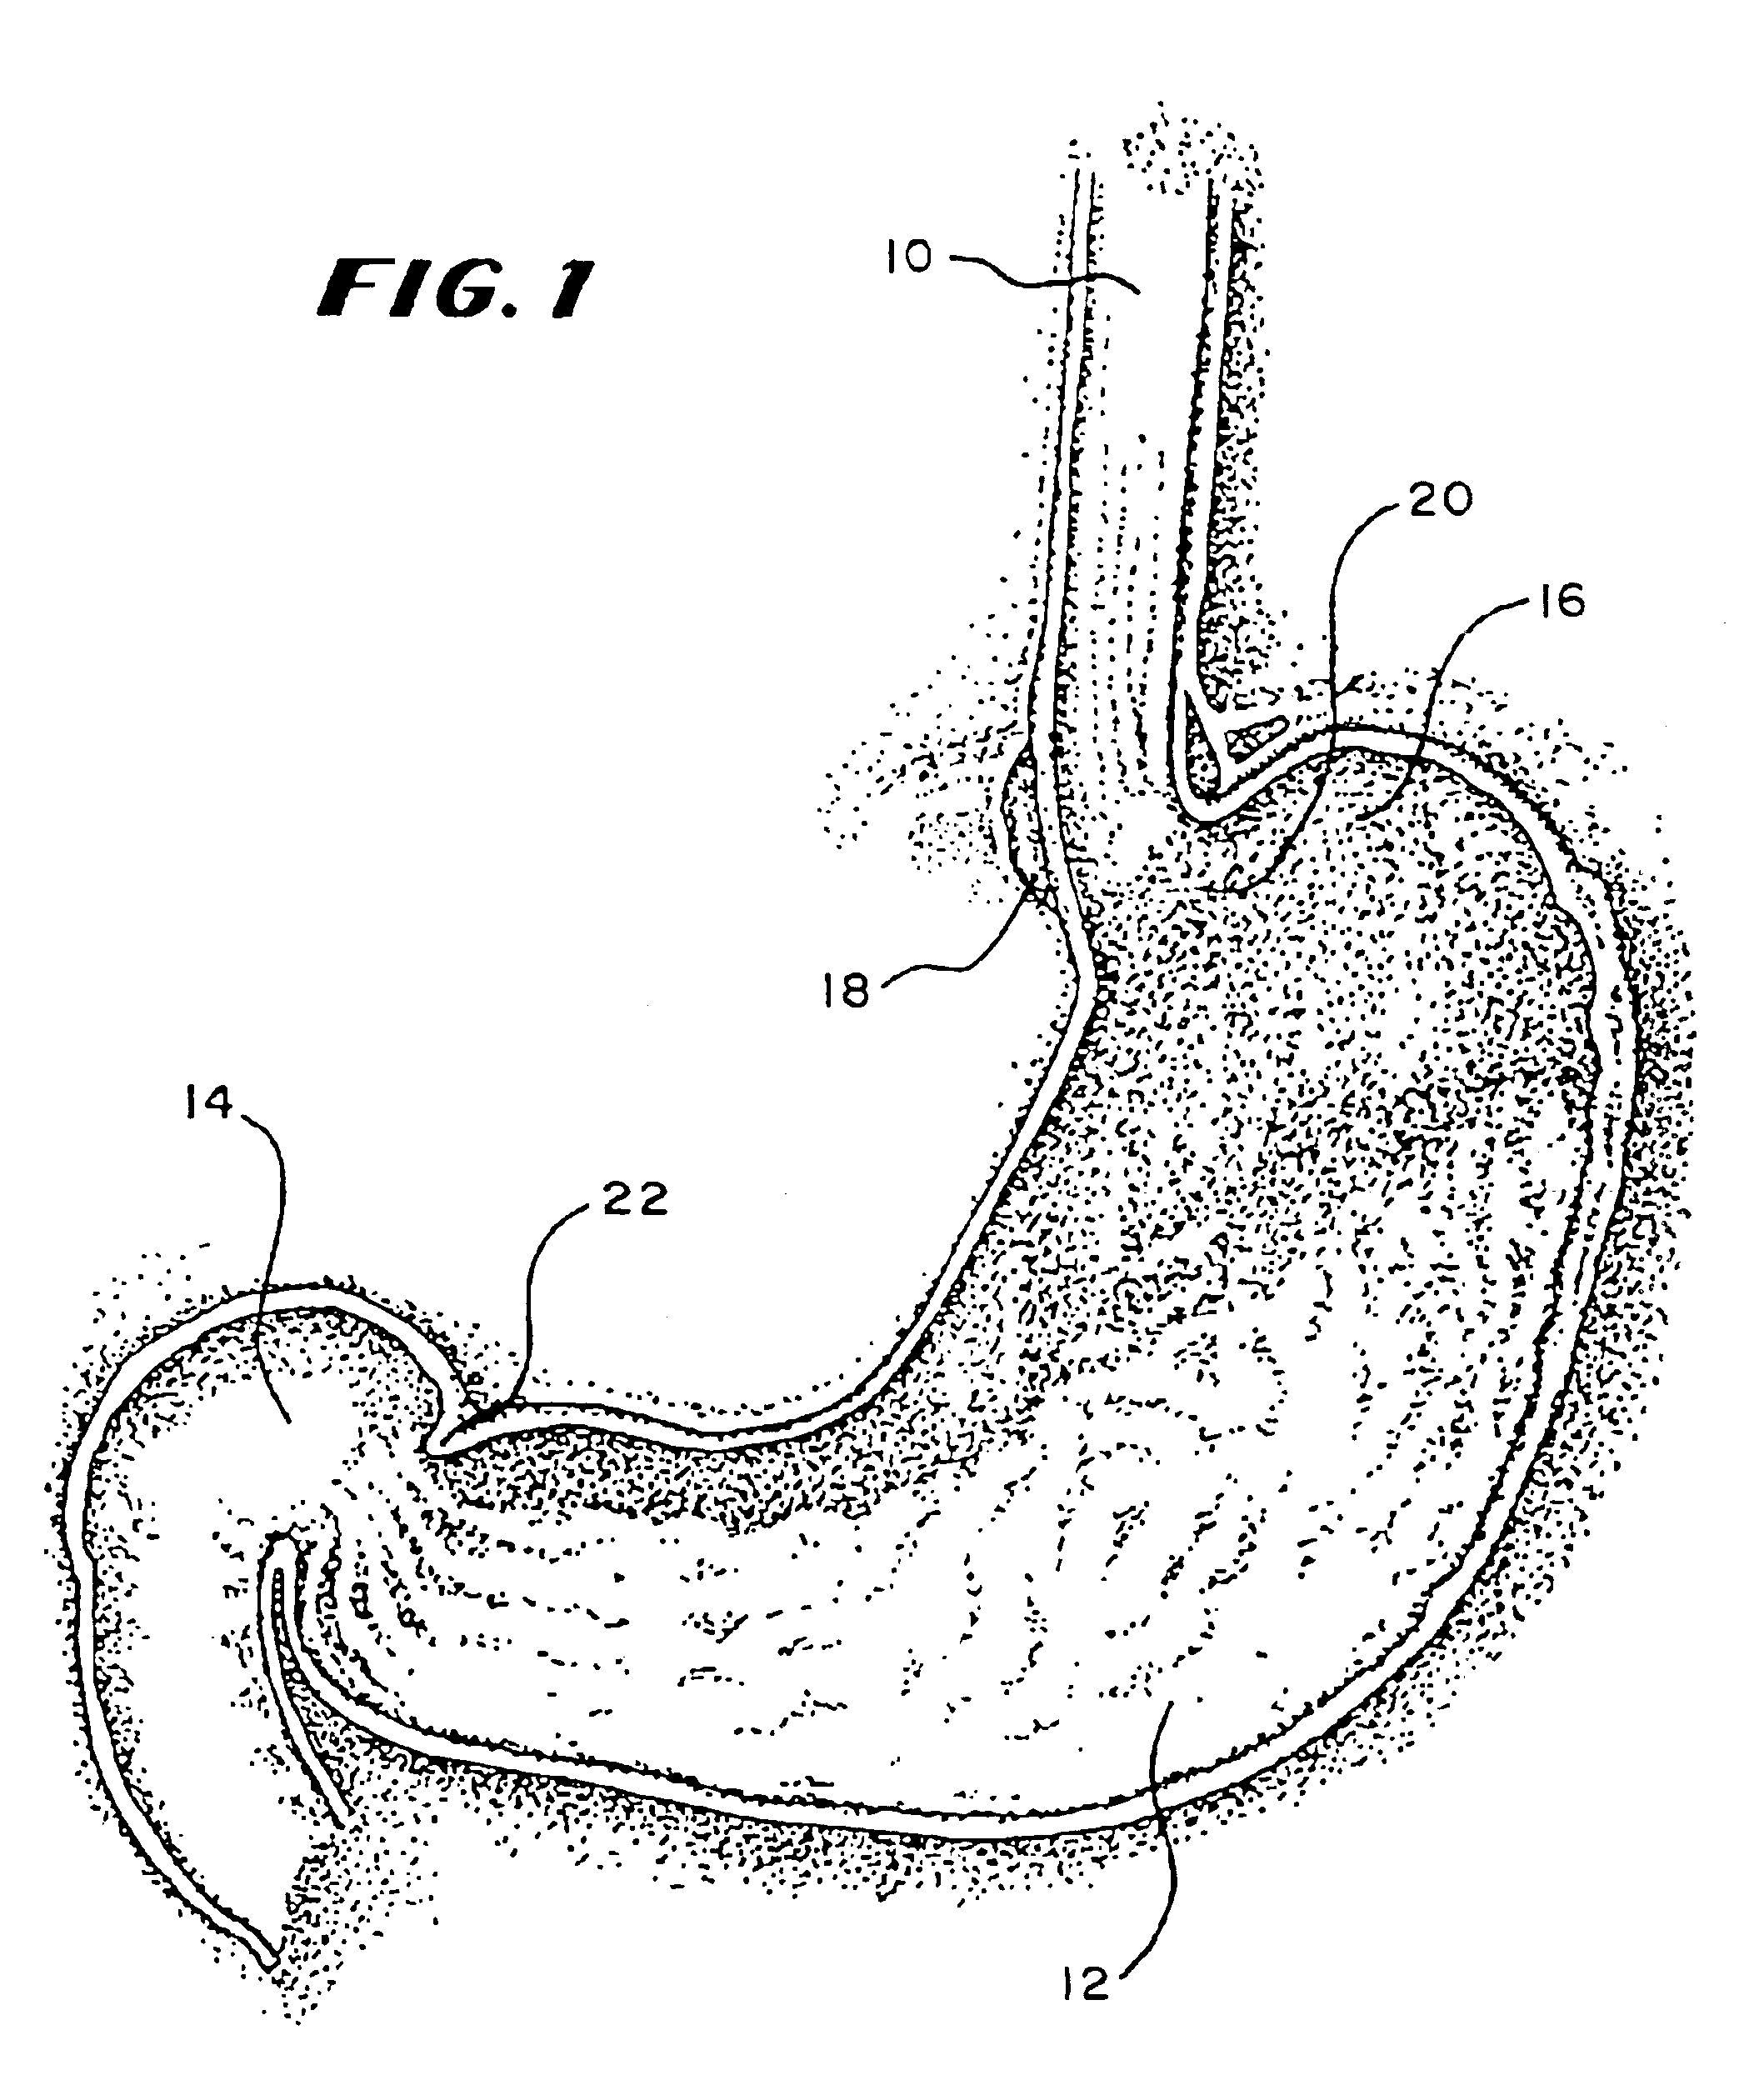 Methods for treating the cardia of the stomach